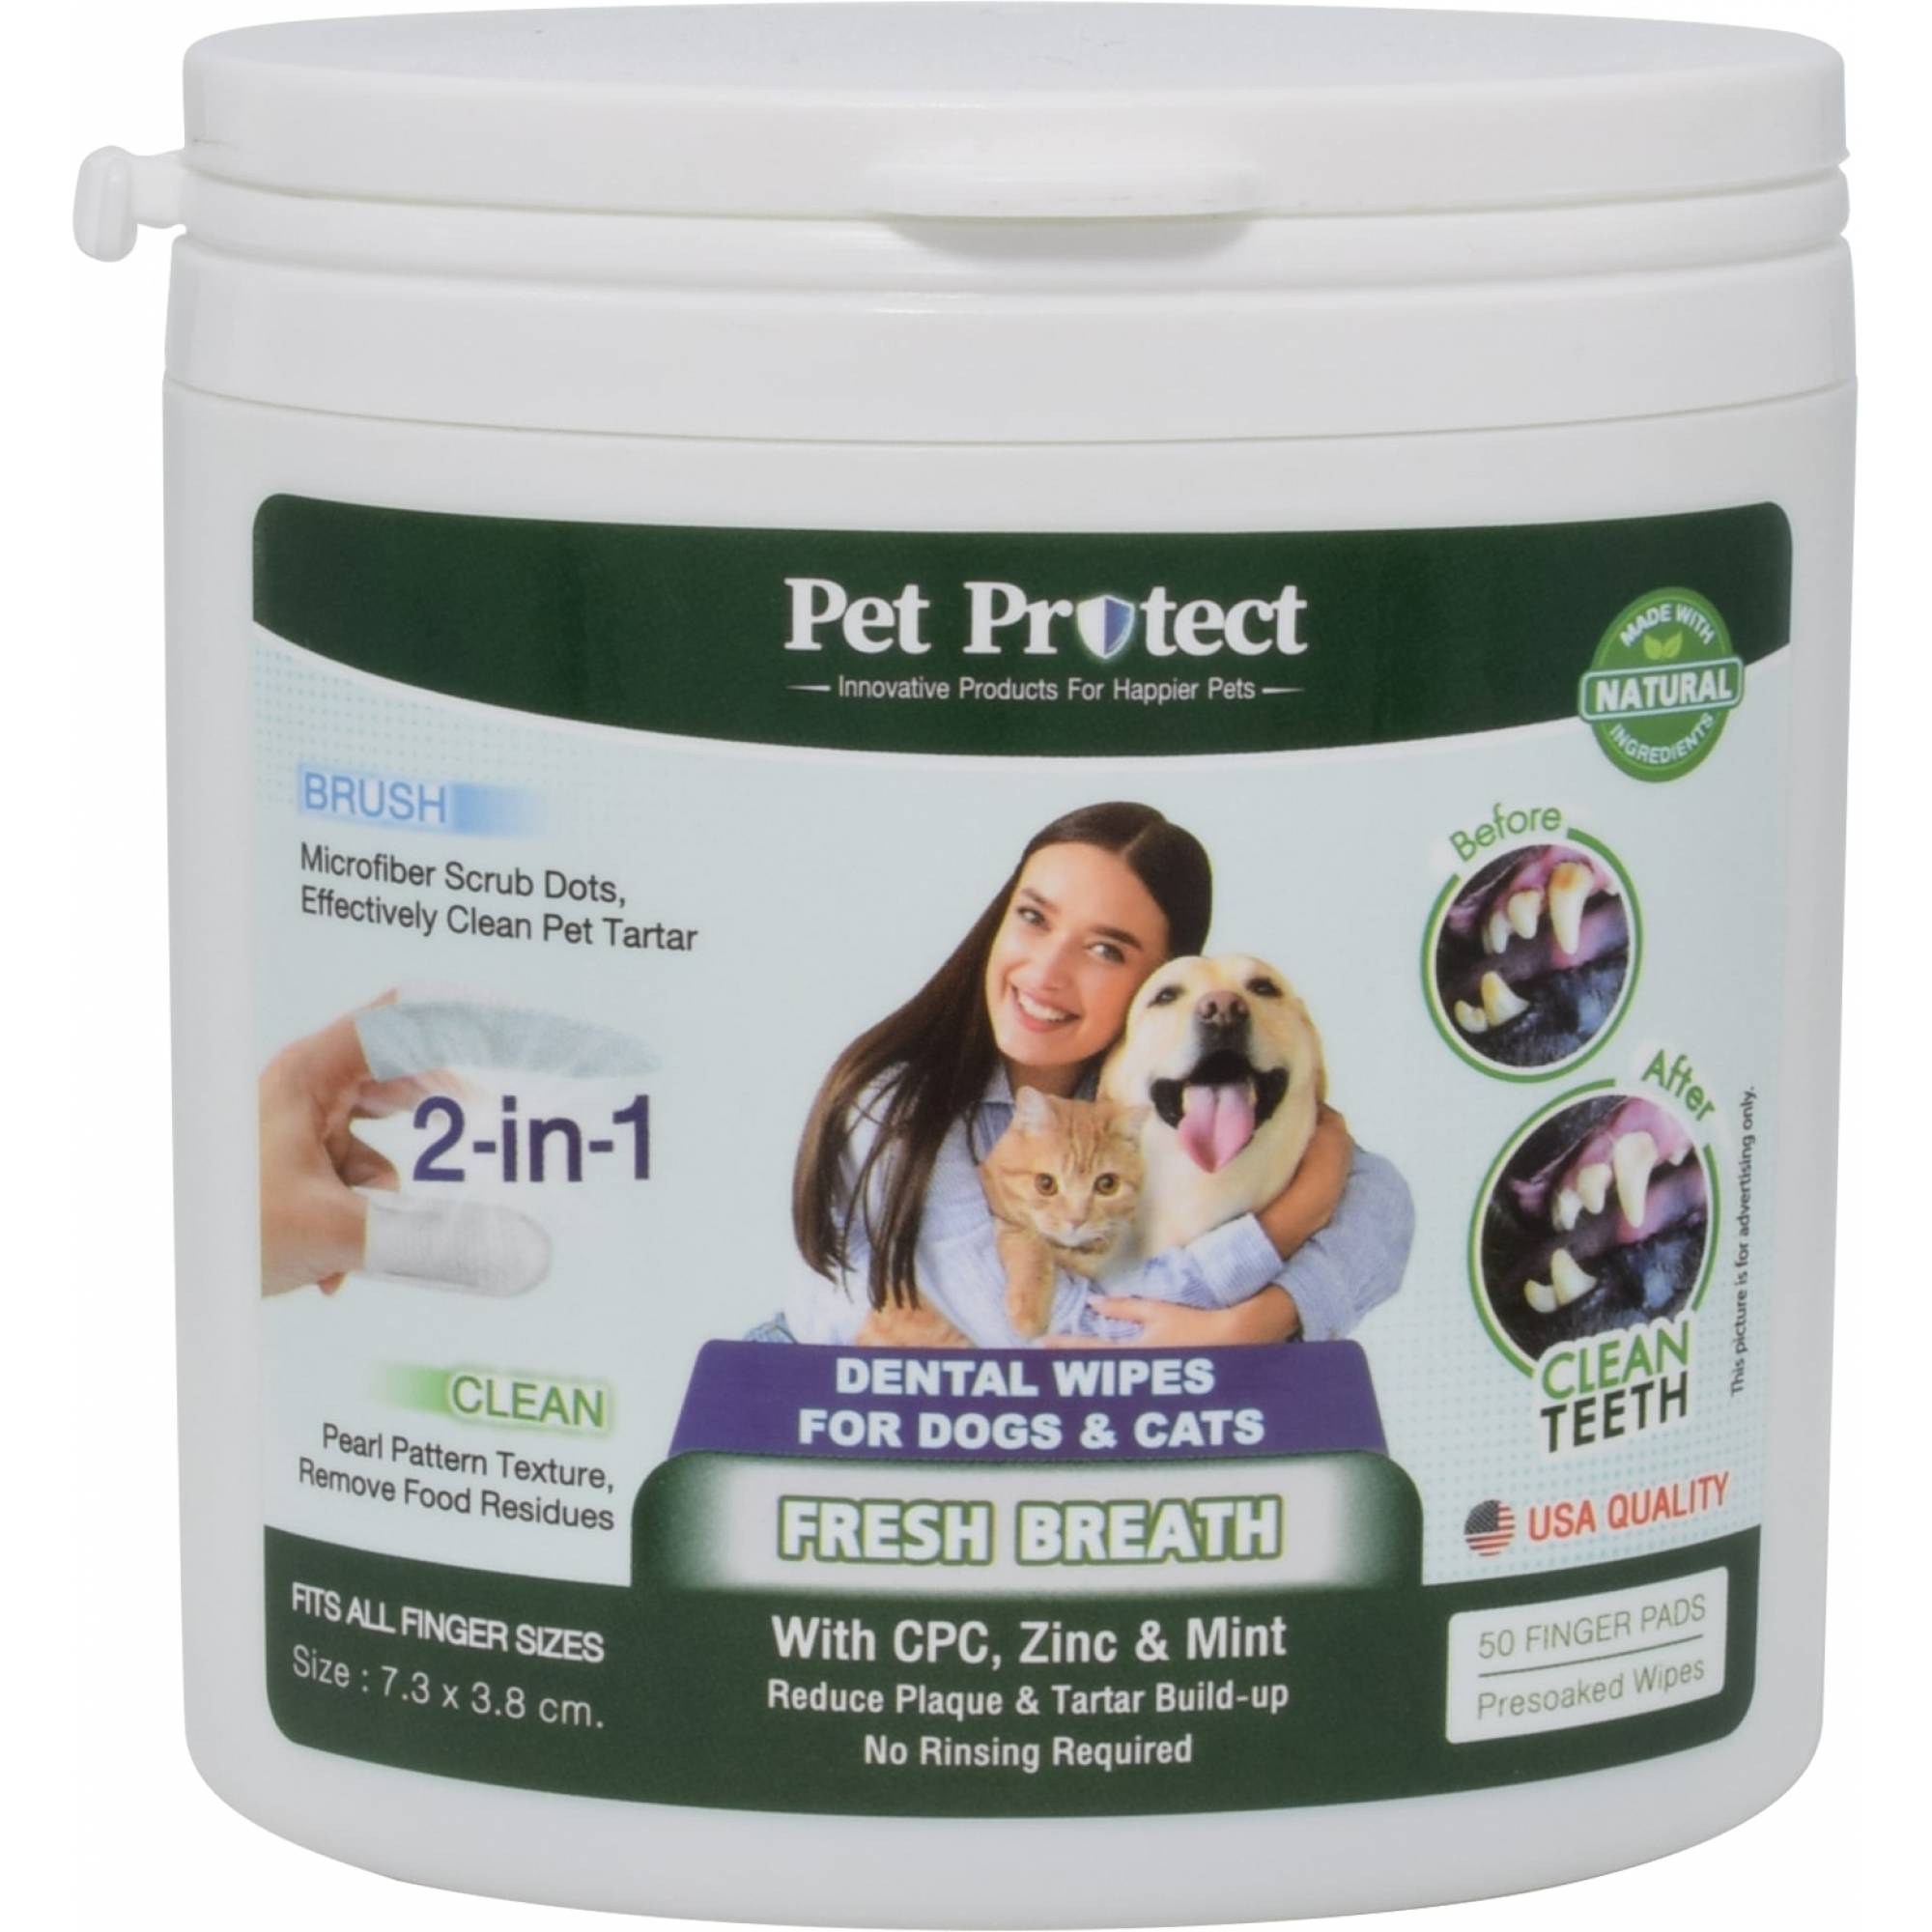 Pet Protect - Cat & Dog 2 in 1 Dental Wipes 50pc (Finger size wipe)